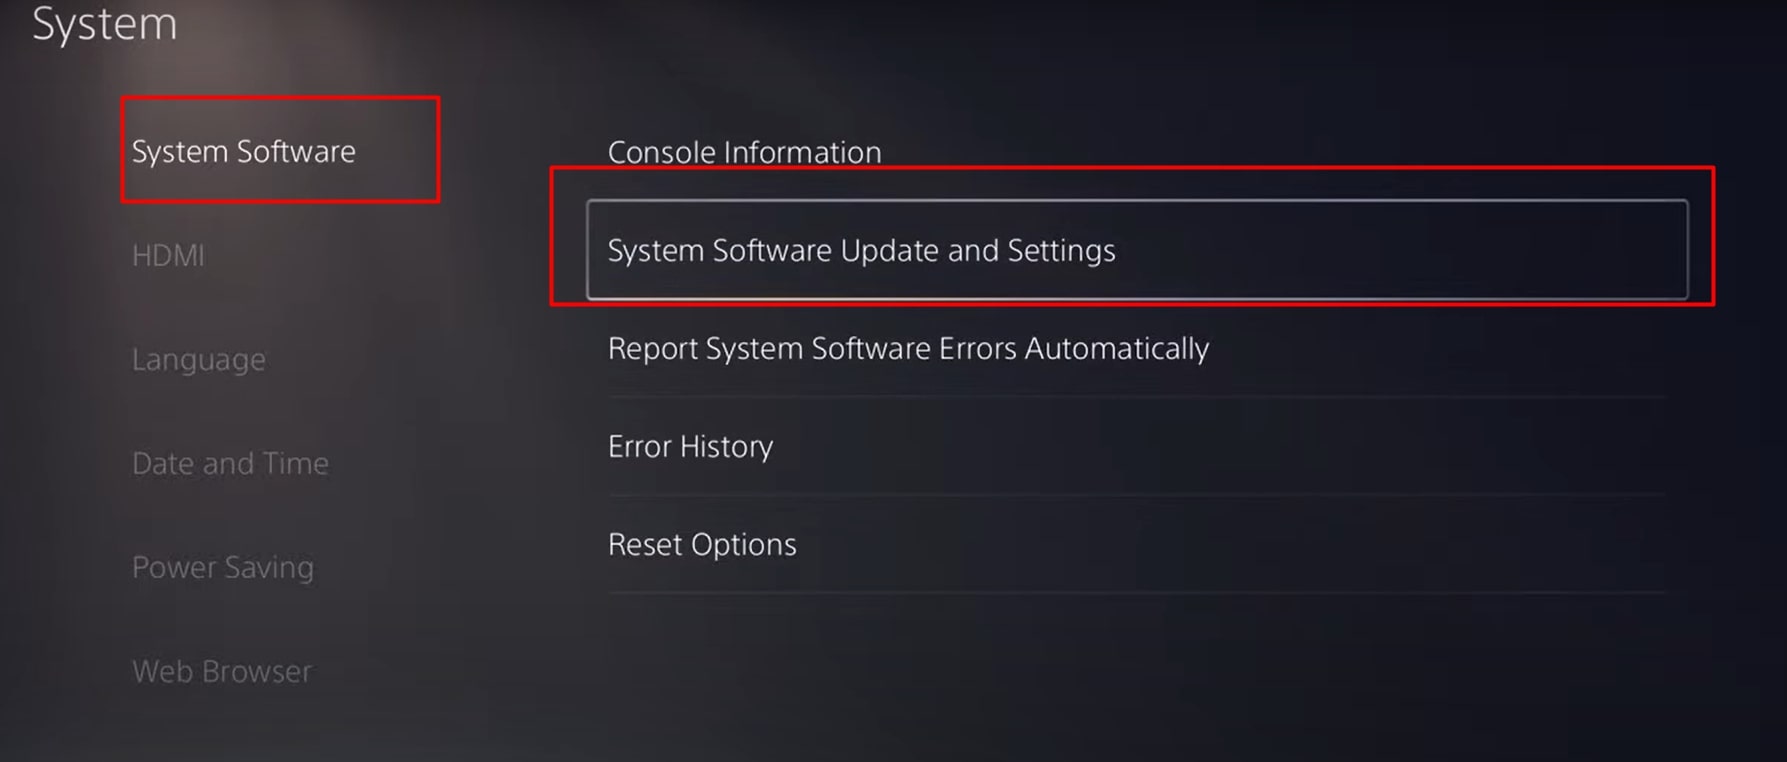 System Software